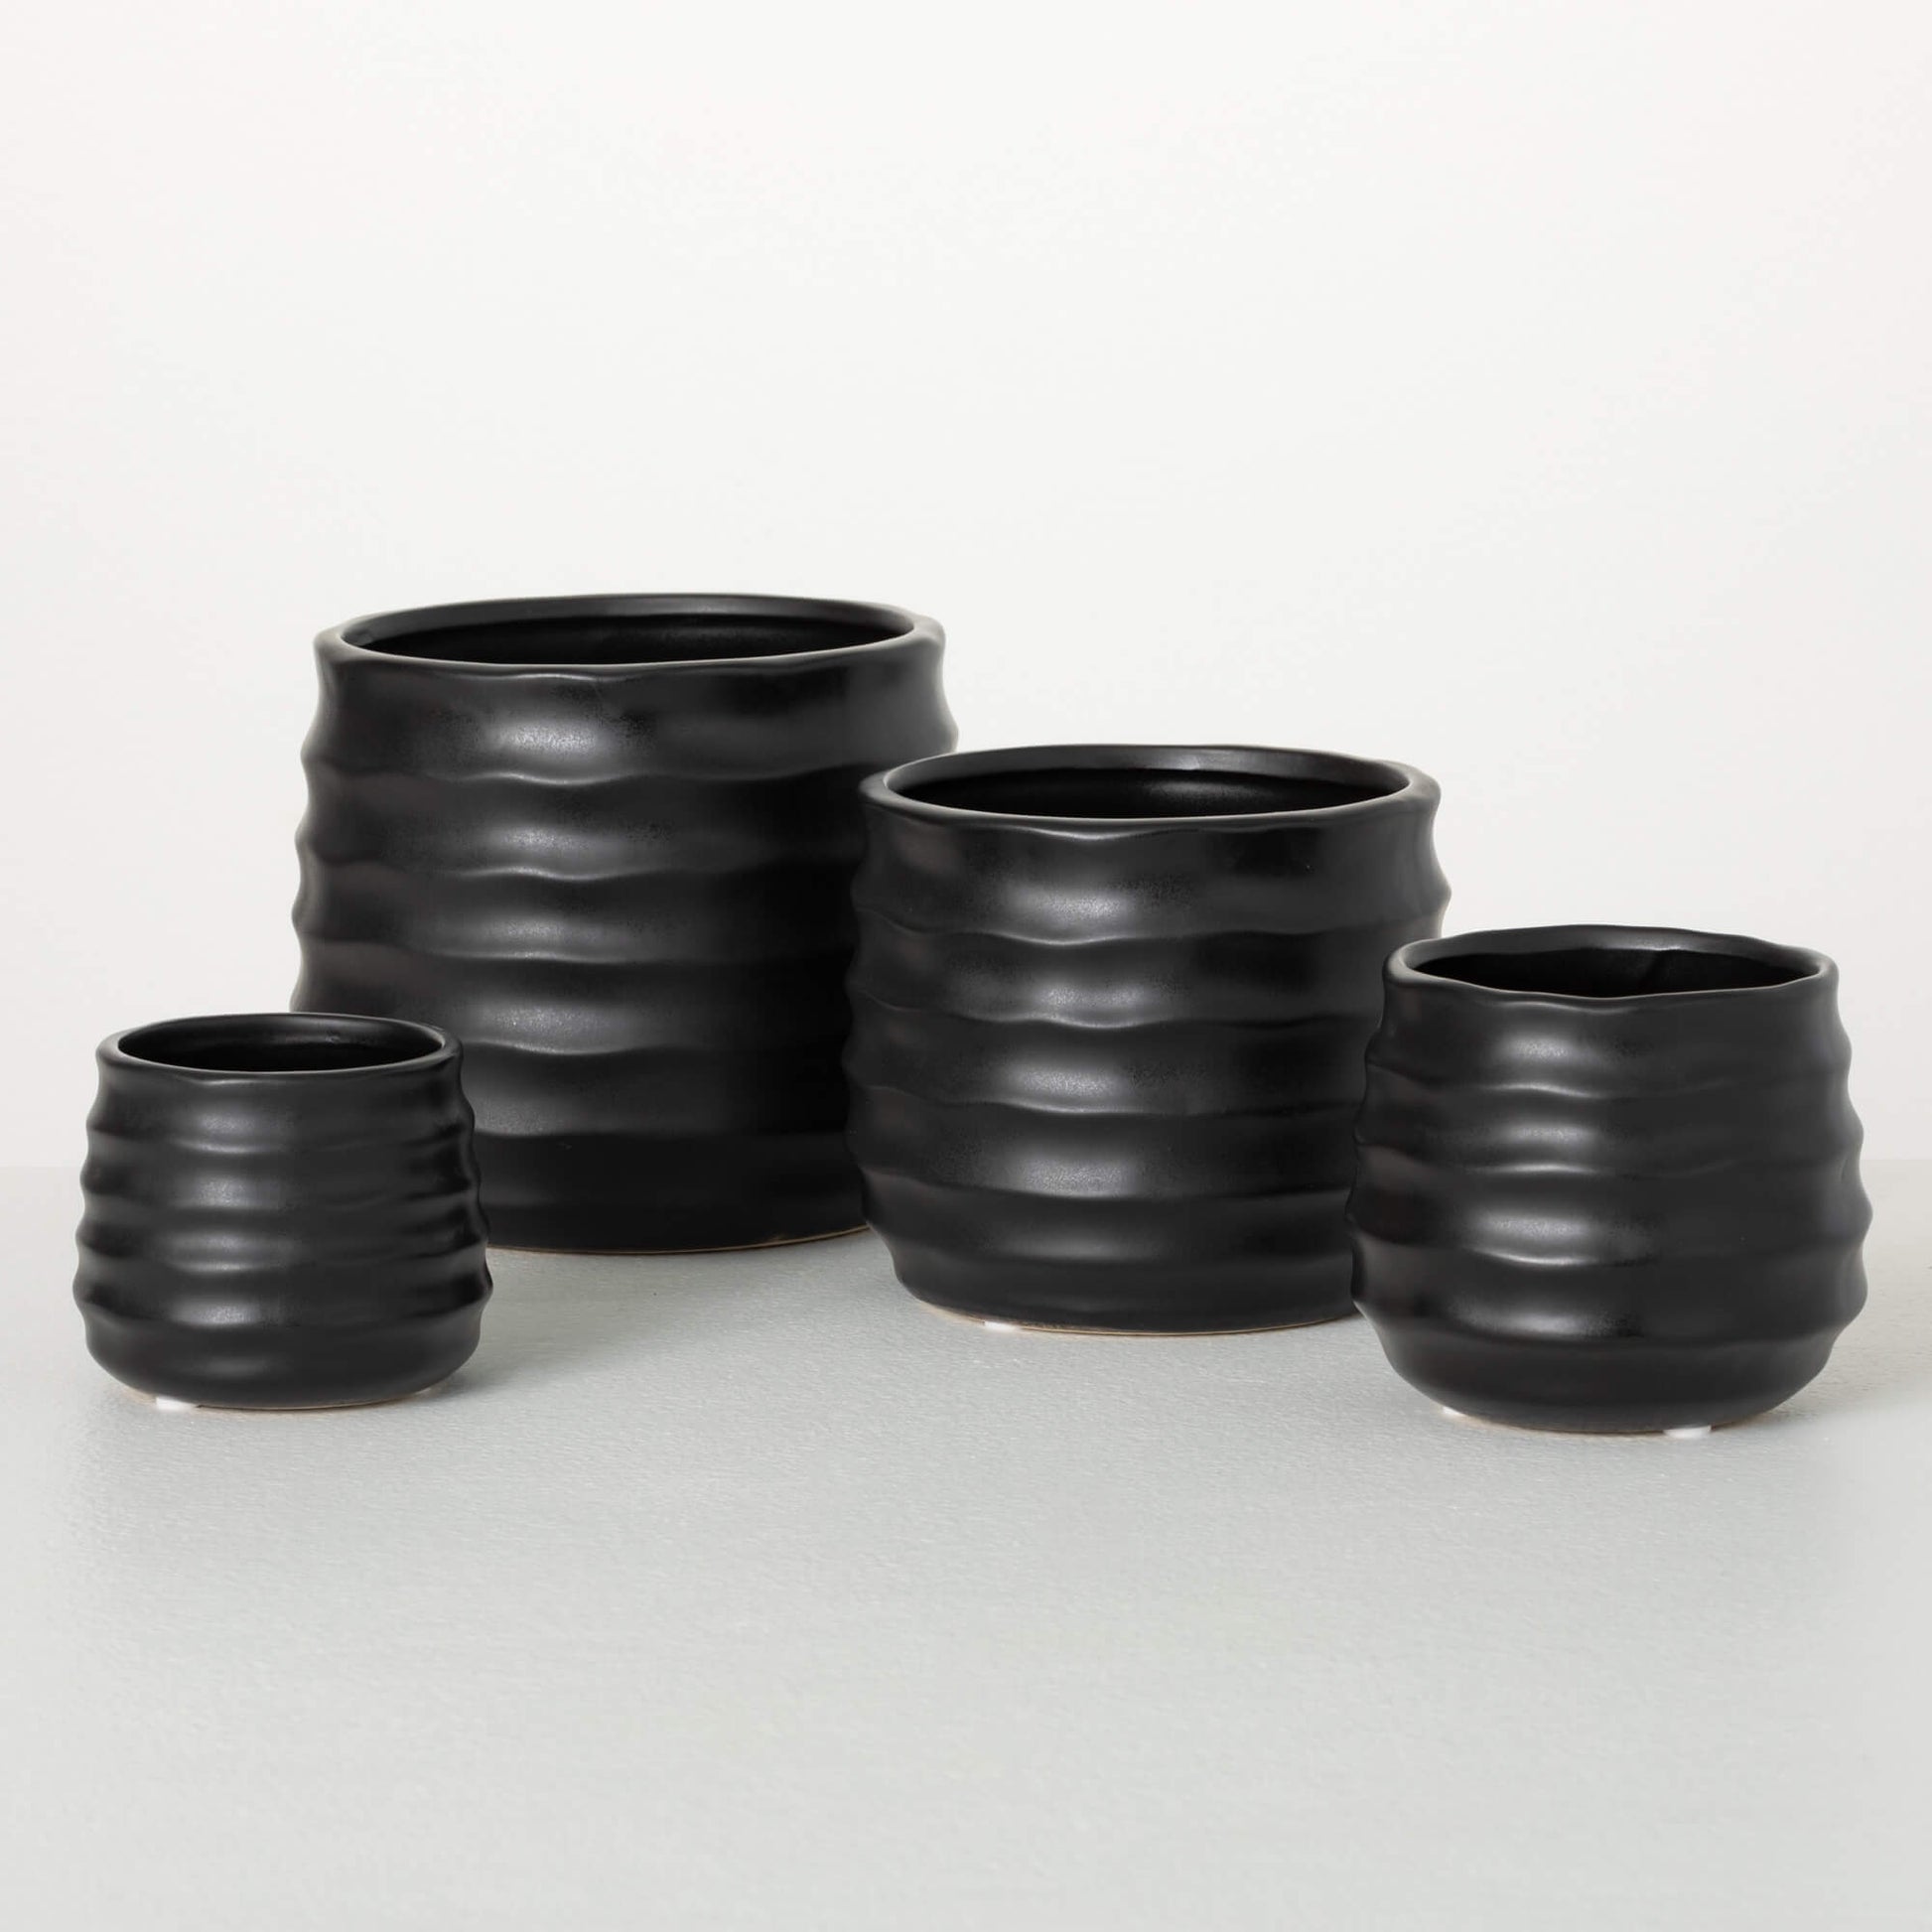 4 sizes of matte black pots woth wavy ribbed lines around the exterior.